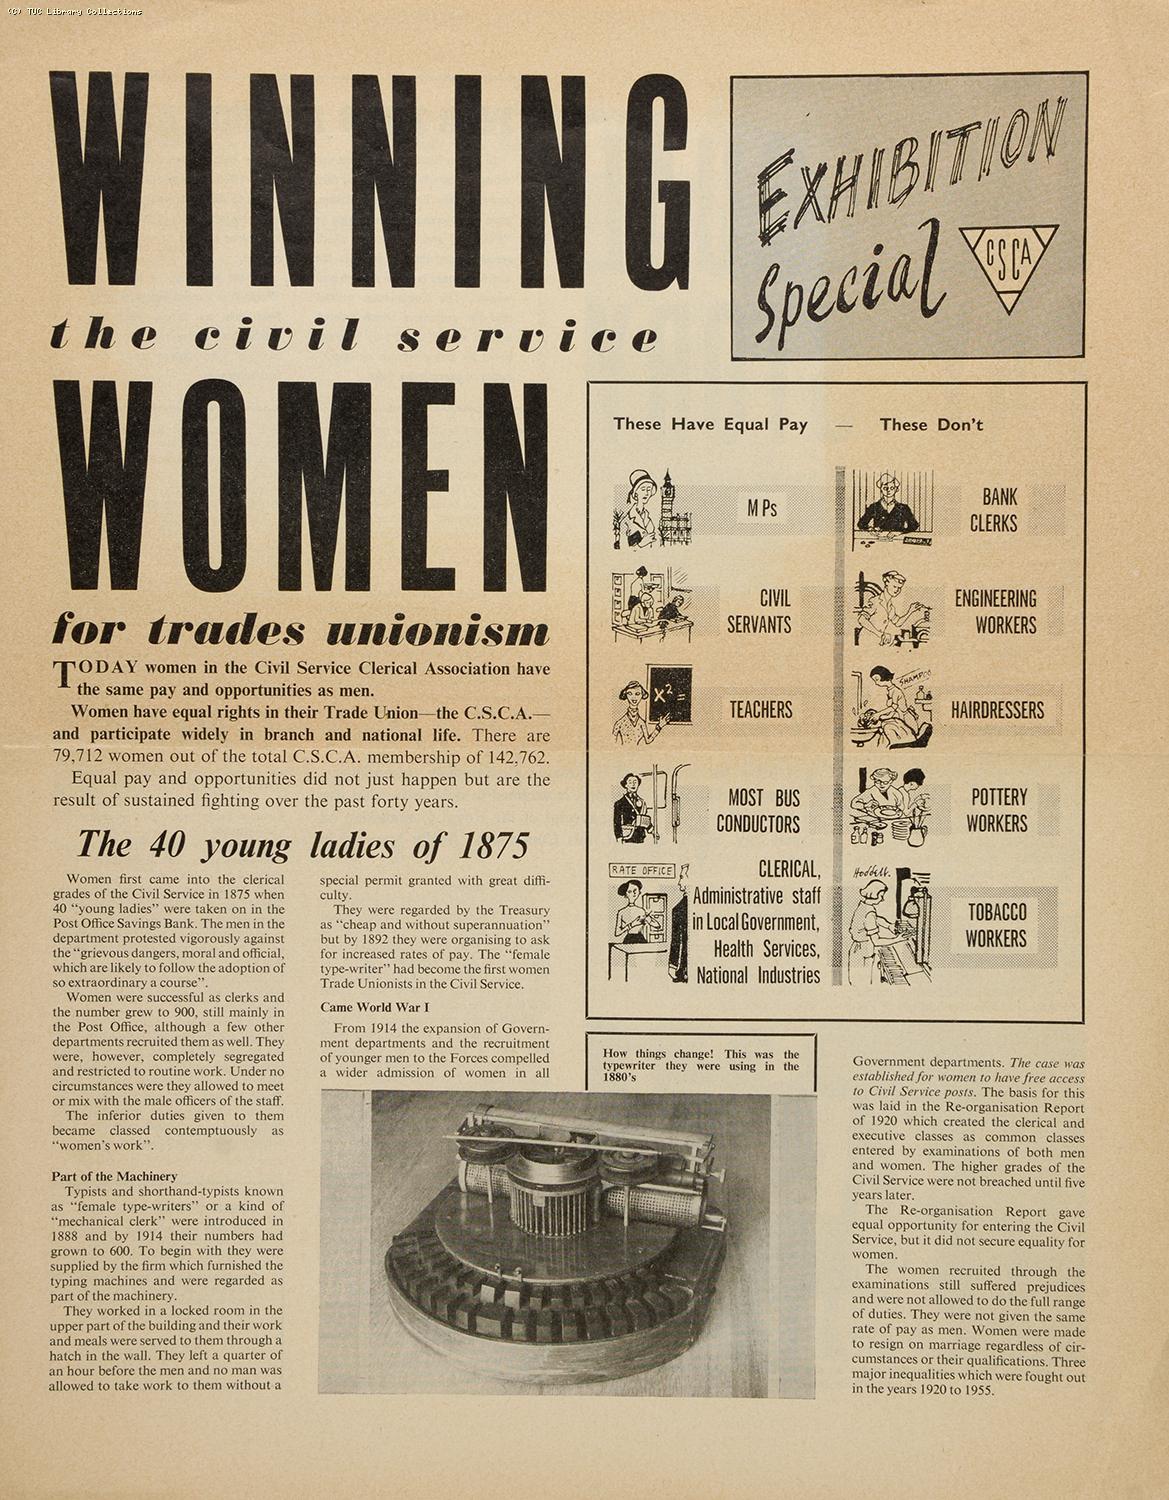 'With Women's Hands' Exhibition 1962